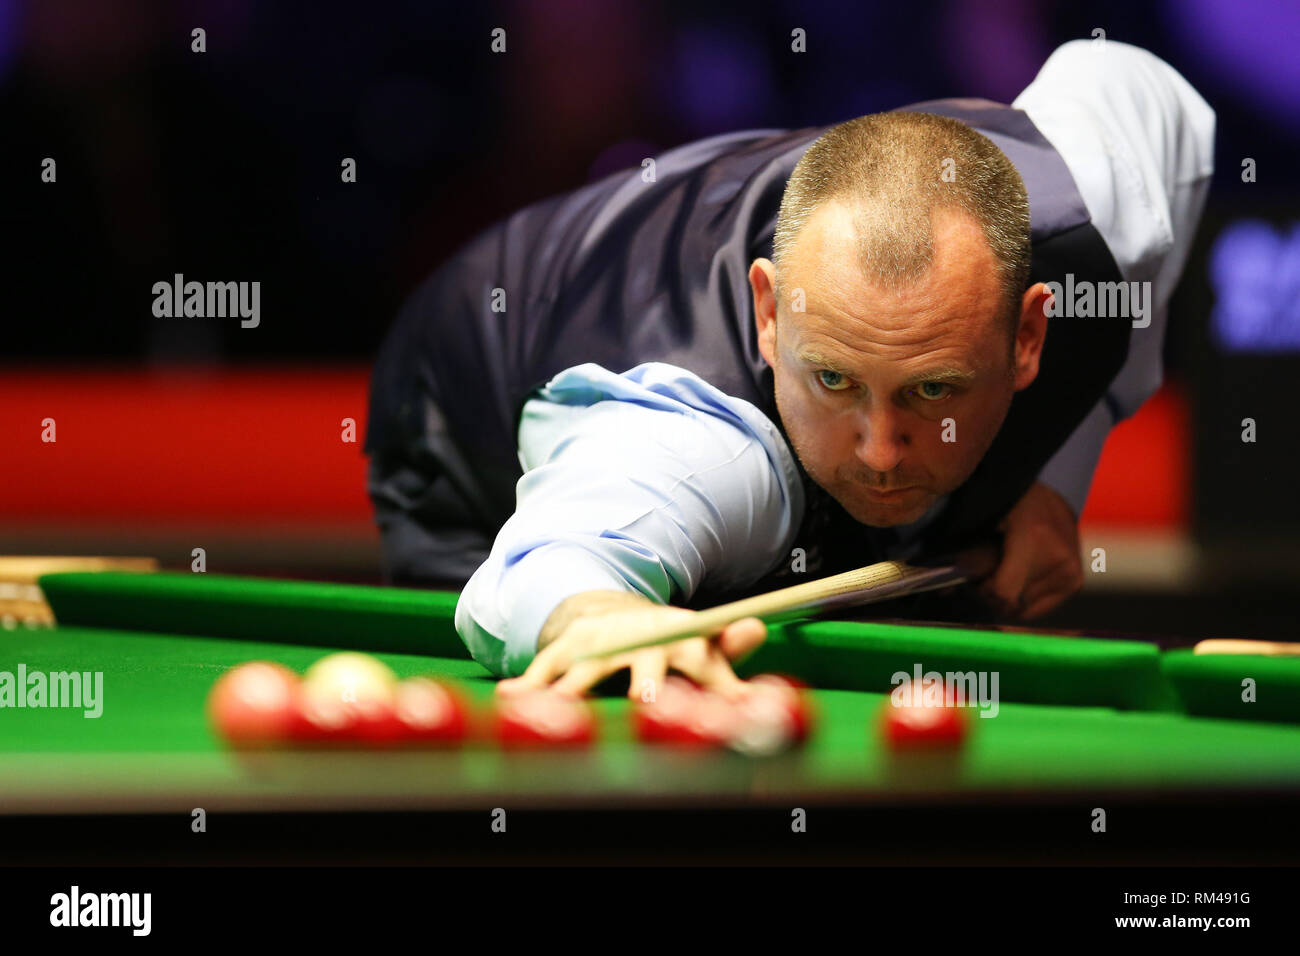 Page 3 - Snooker Champion High Resolution Stock Photography and Images